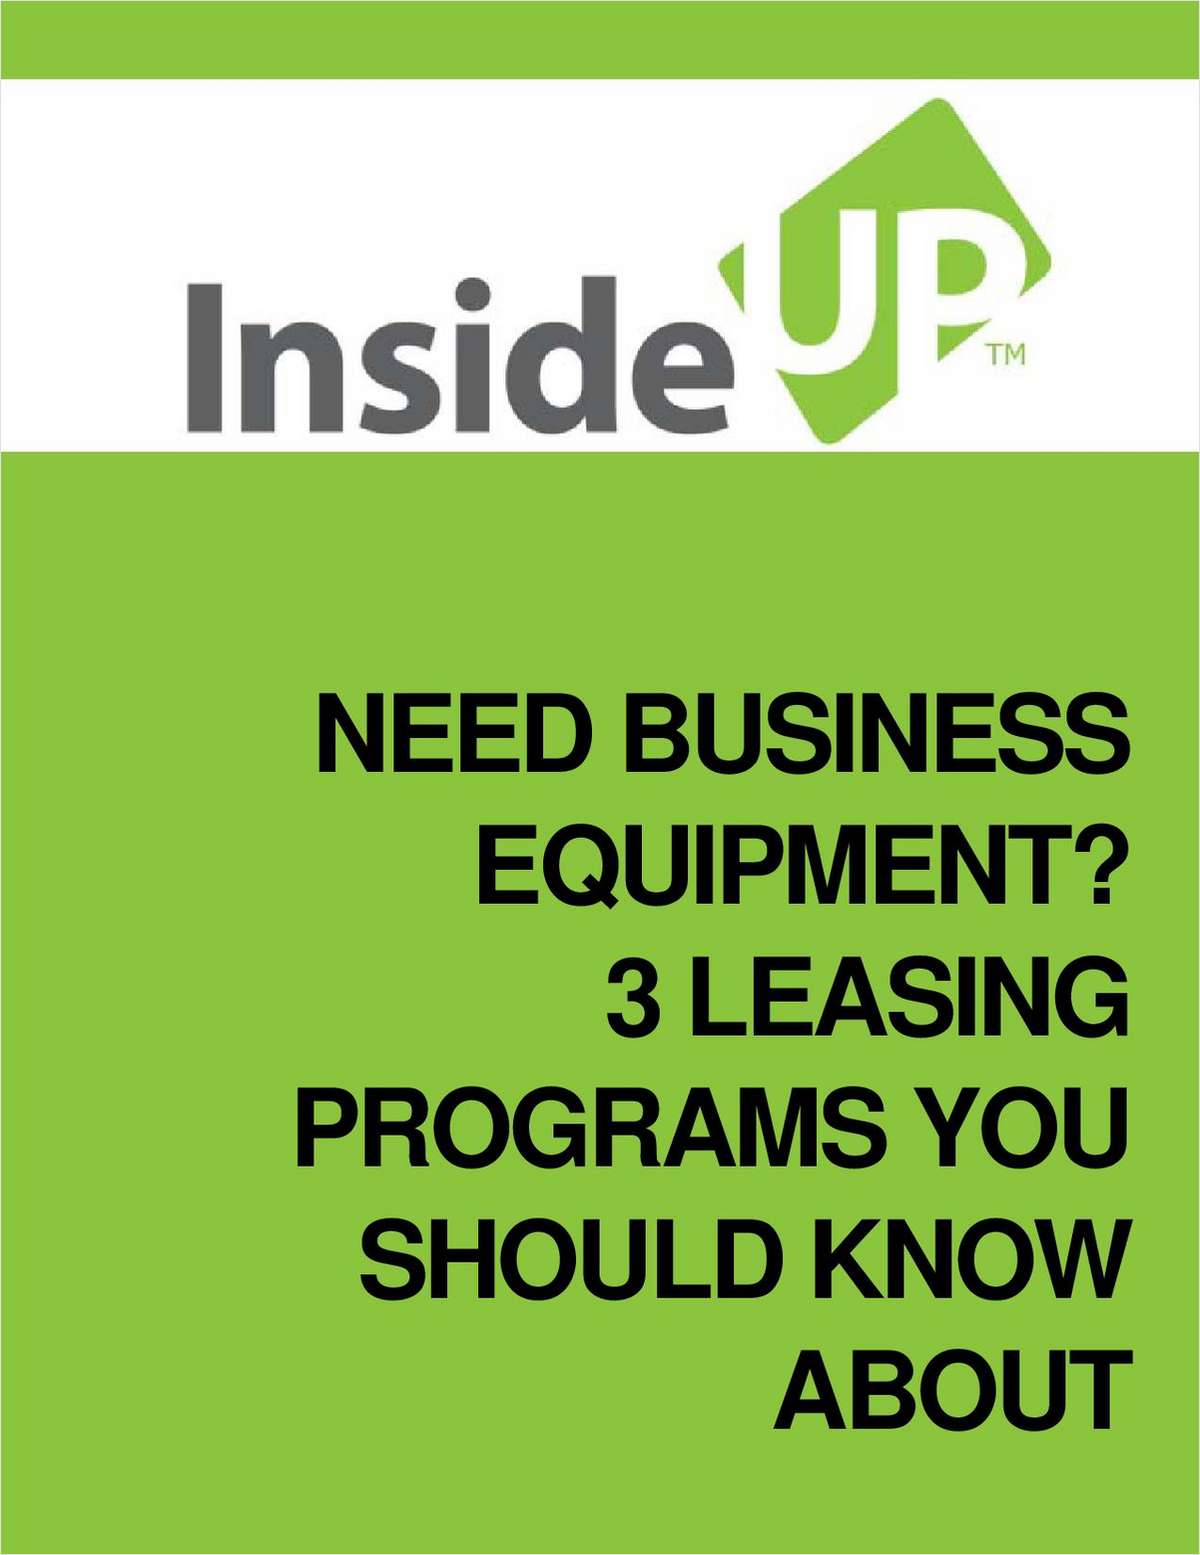 Need Business Equipment? 3 Leasing Programs You Should Know About